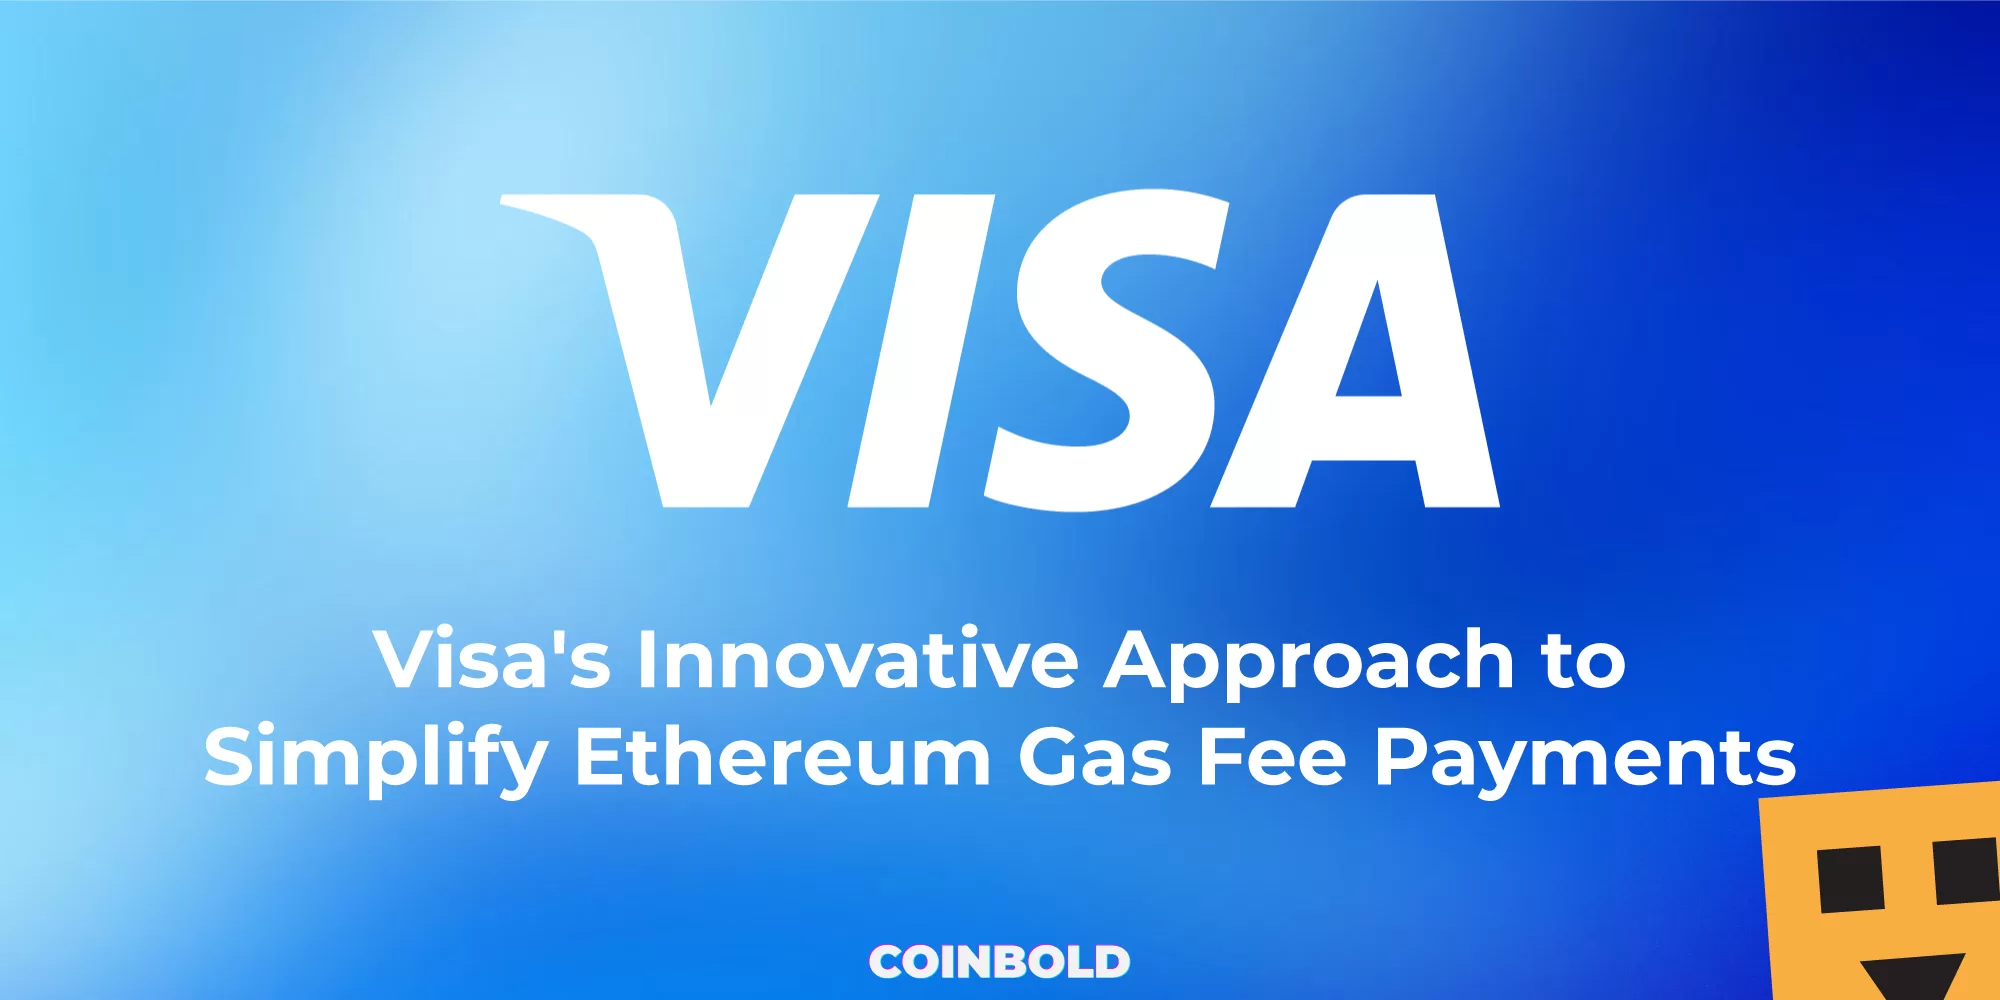 Visa's Innovative Approach to Simplify Ethereum Gas Fee Payments